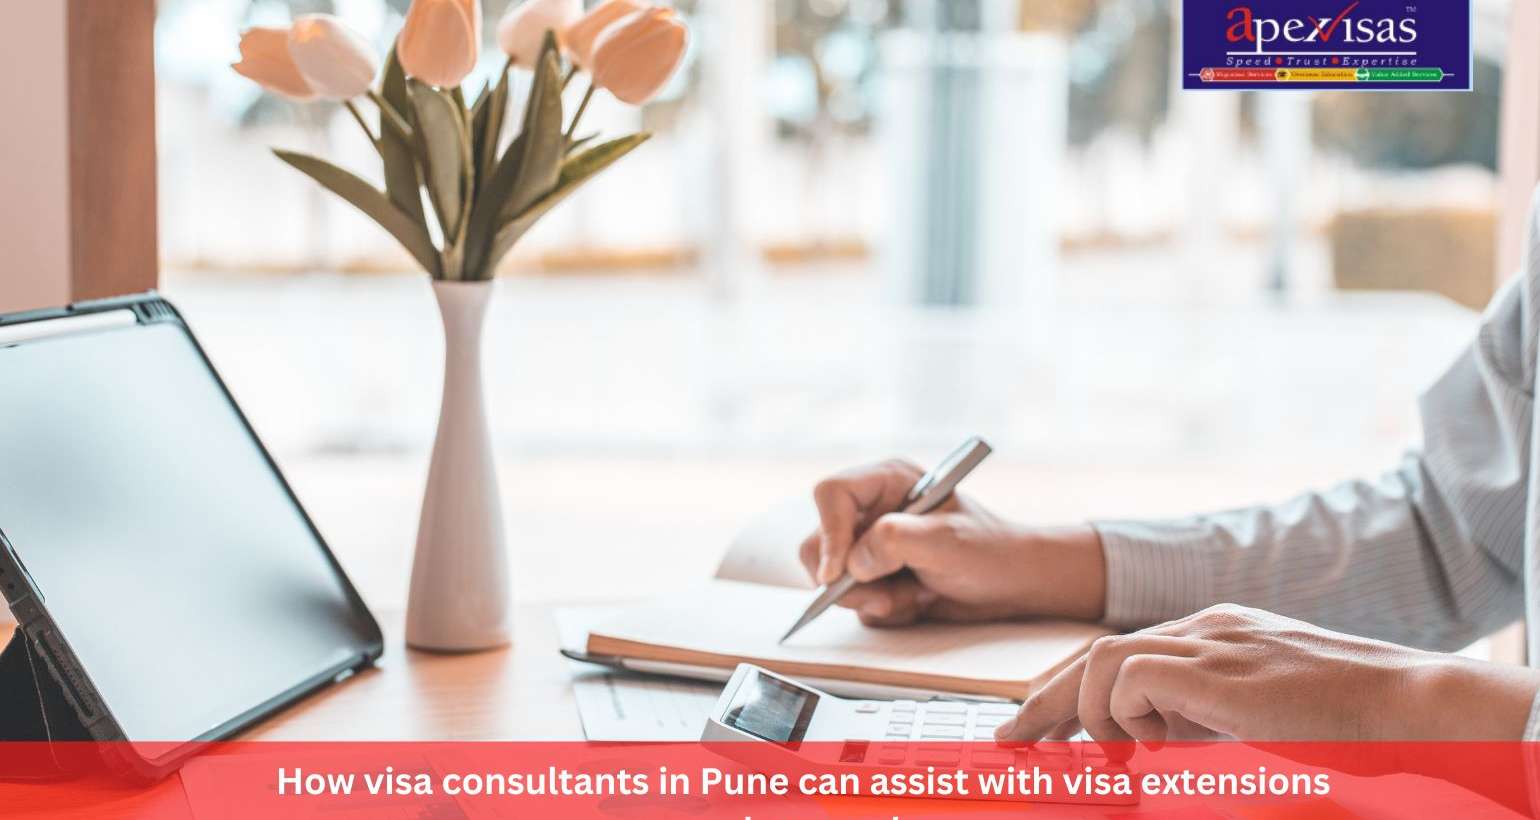 How visa consultants in Pune can assist with visa extensions and renewals